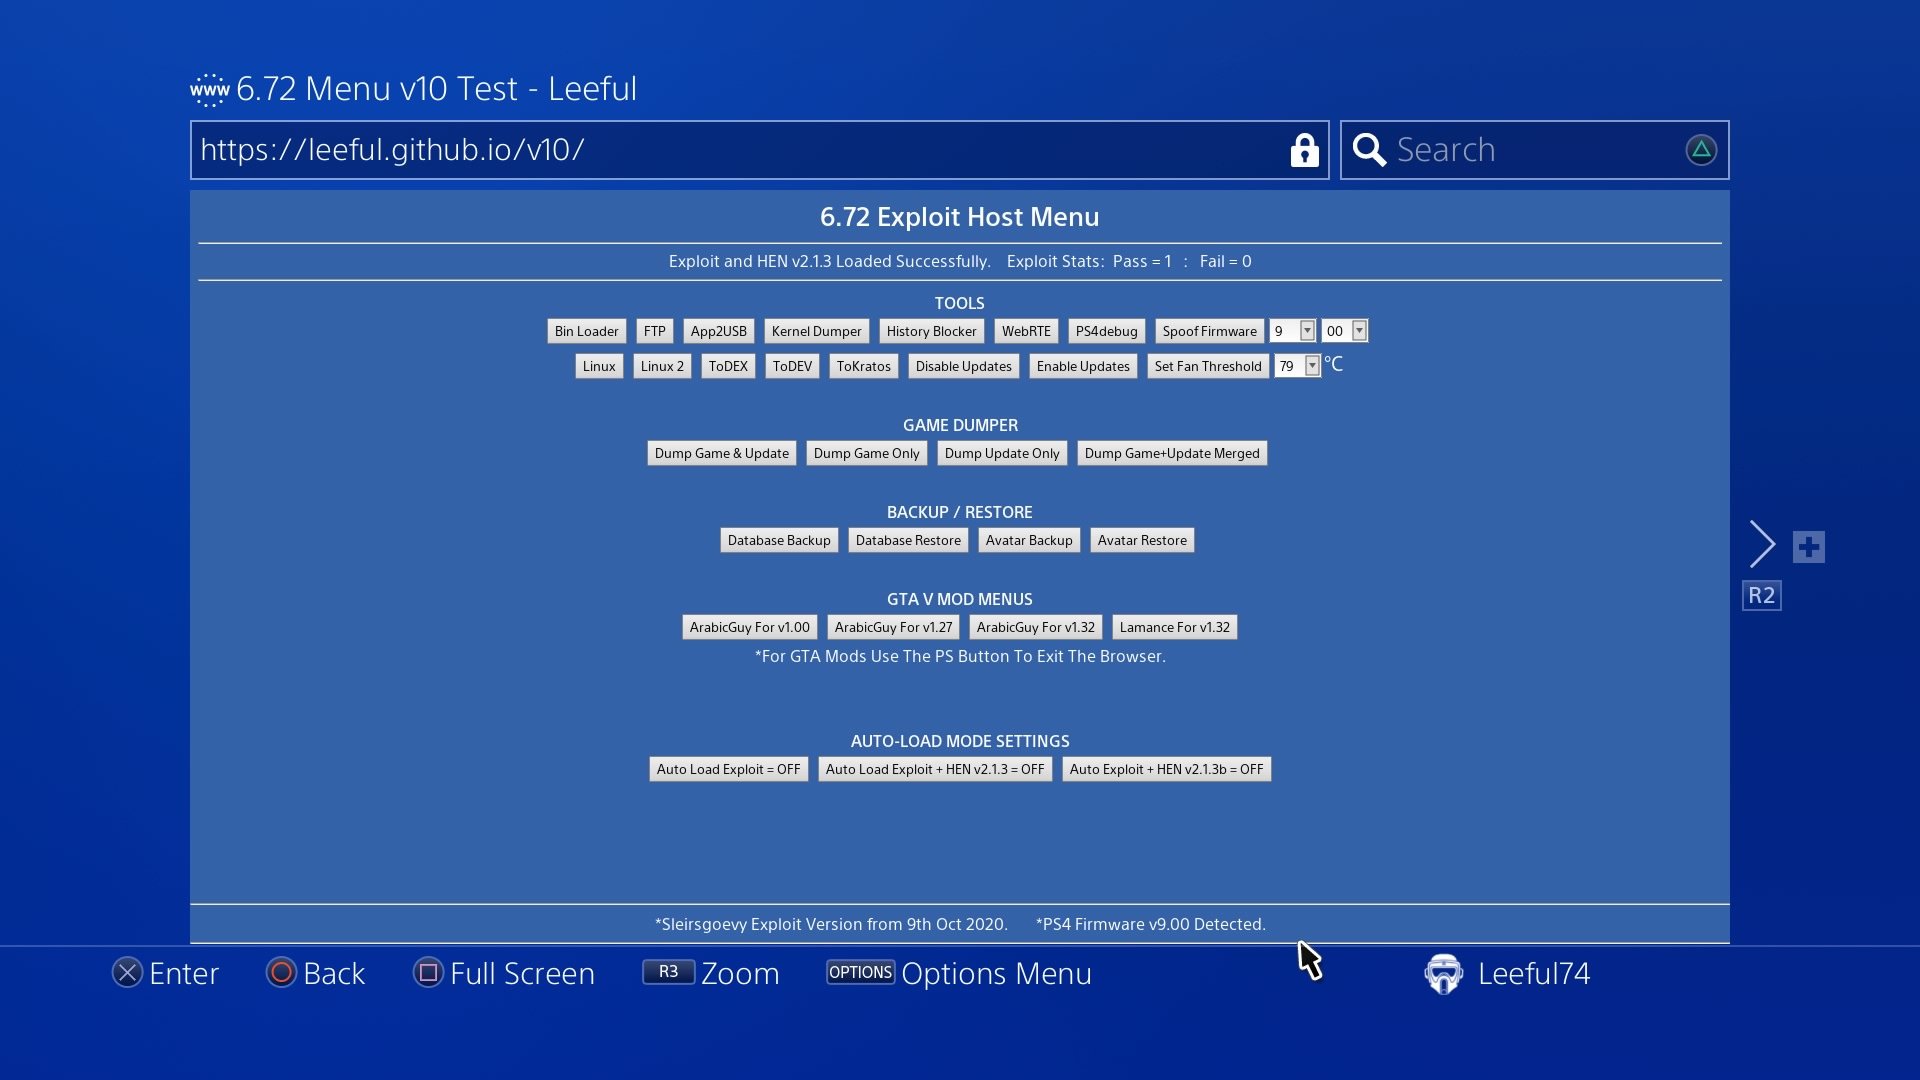 RELEASE] 5 New 6.72 Exploit Menus To Try | GBAtemp.net - The Independent  Video Game Community